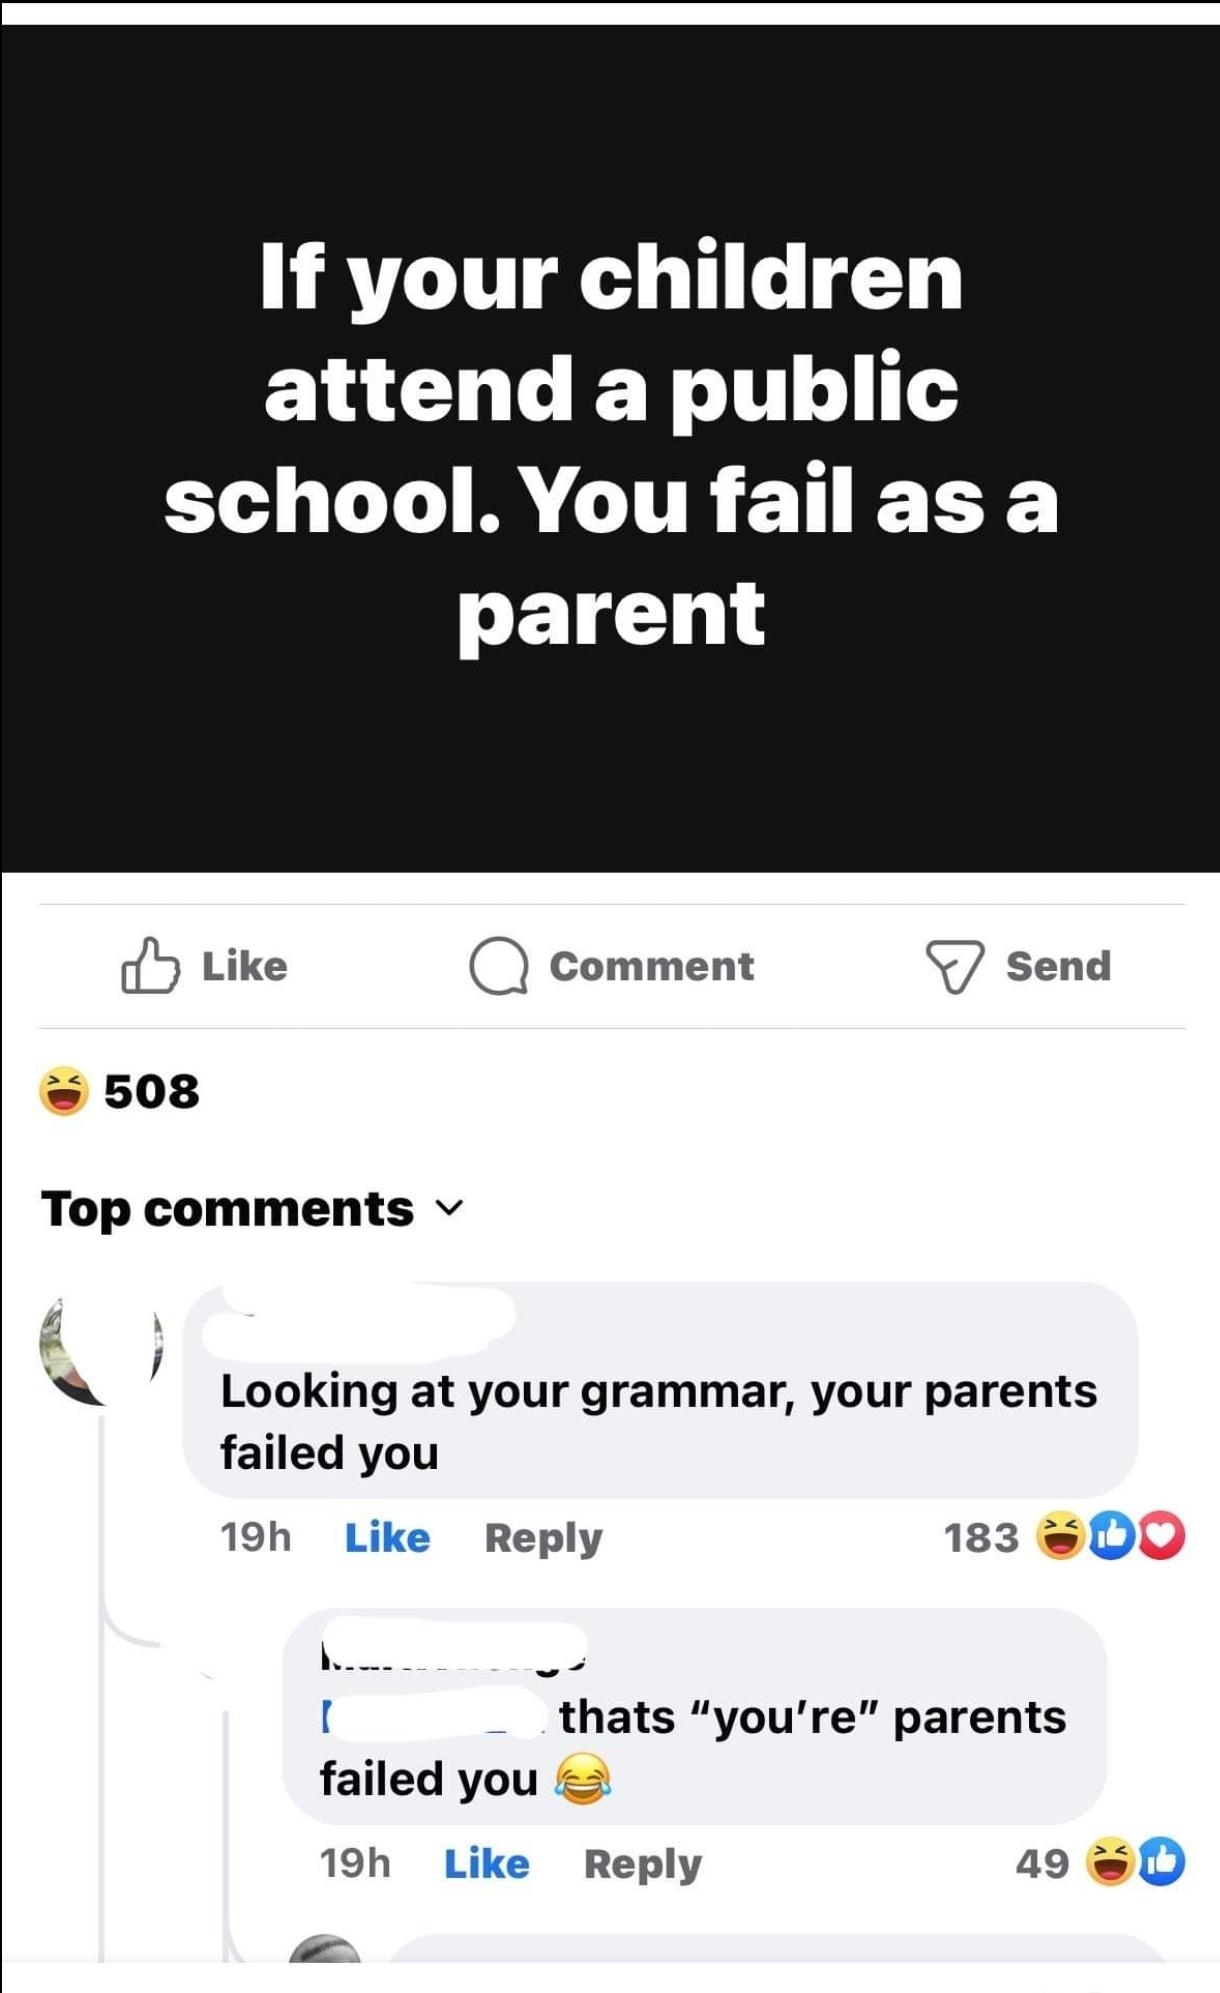 &quot;Looking at your grammar, your parents failed you&quot;